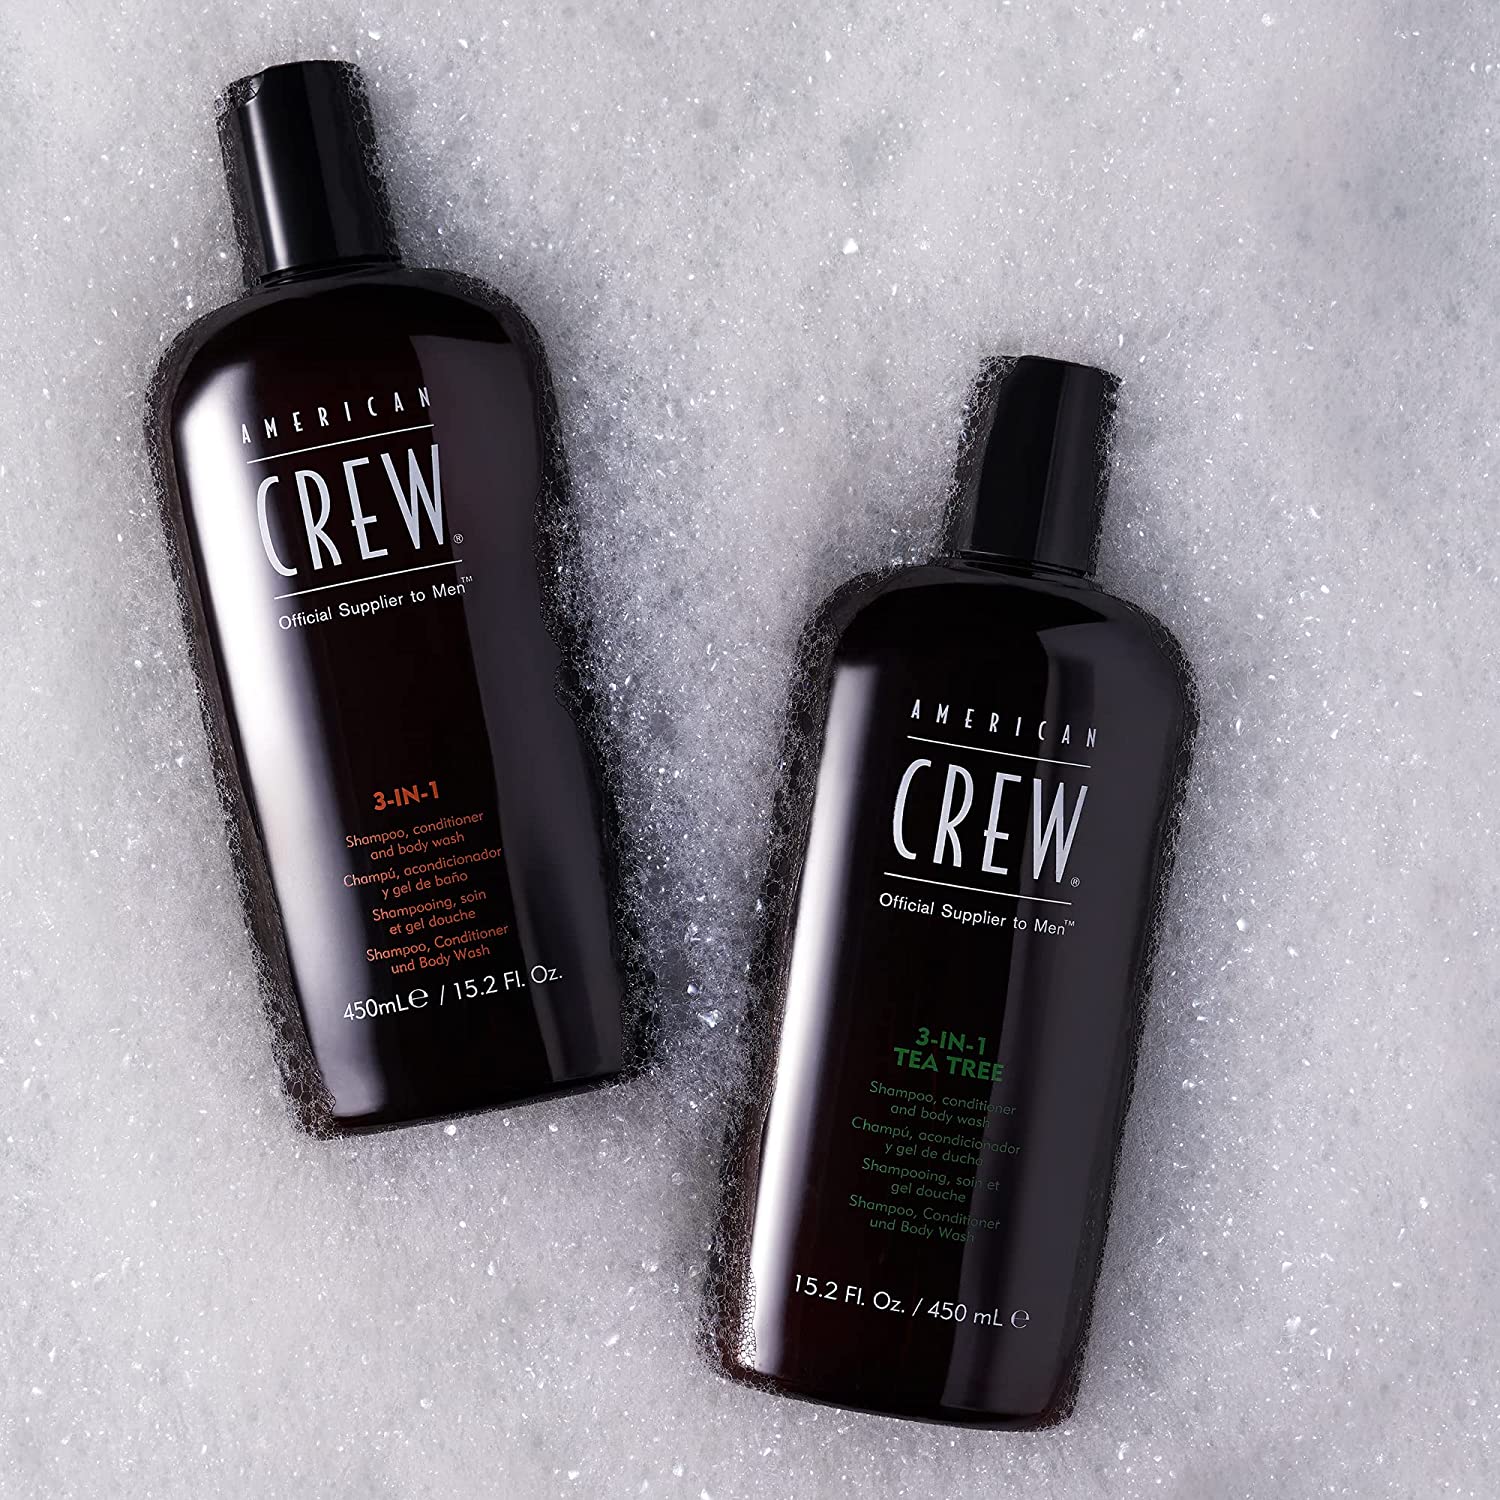 American Crew Classic Shampoo Conditioner and Body Wash | Above The